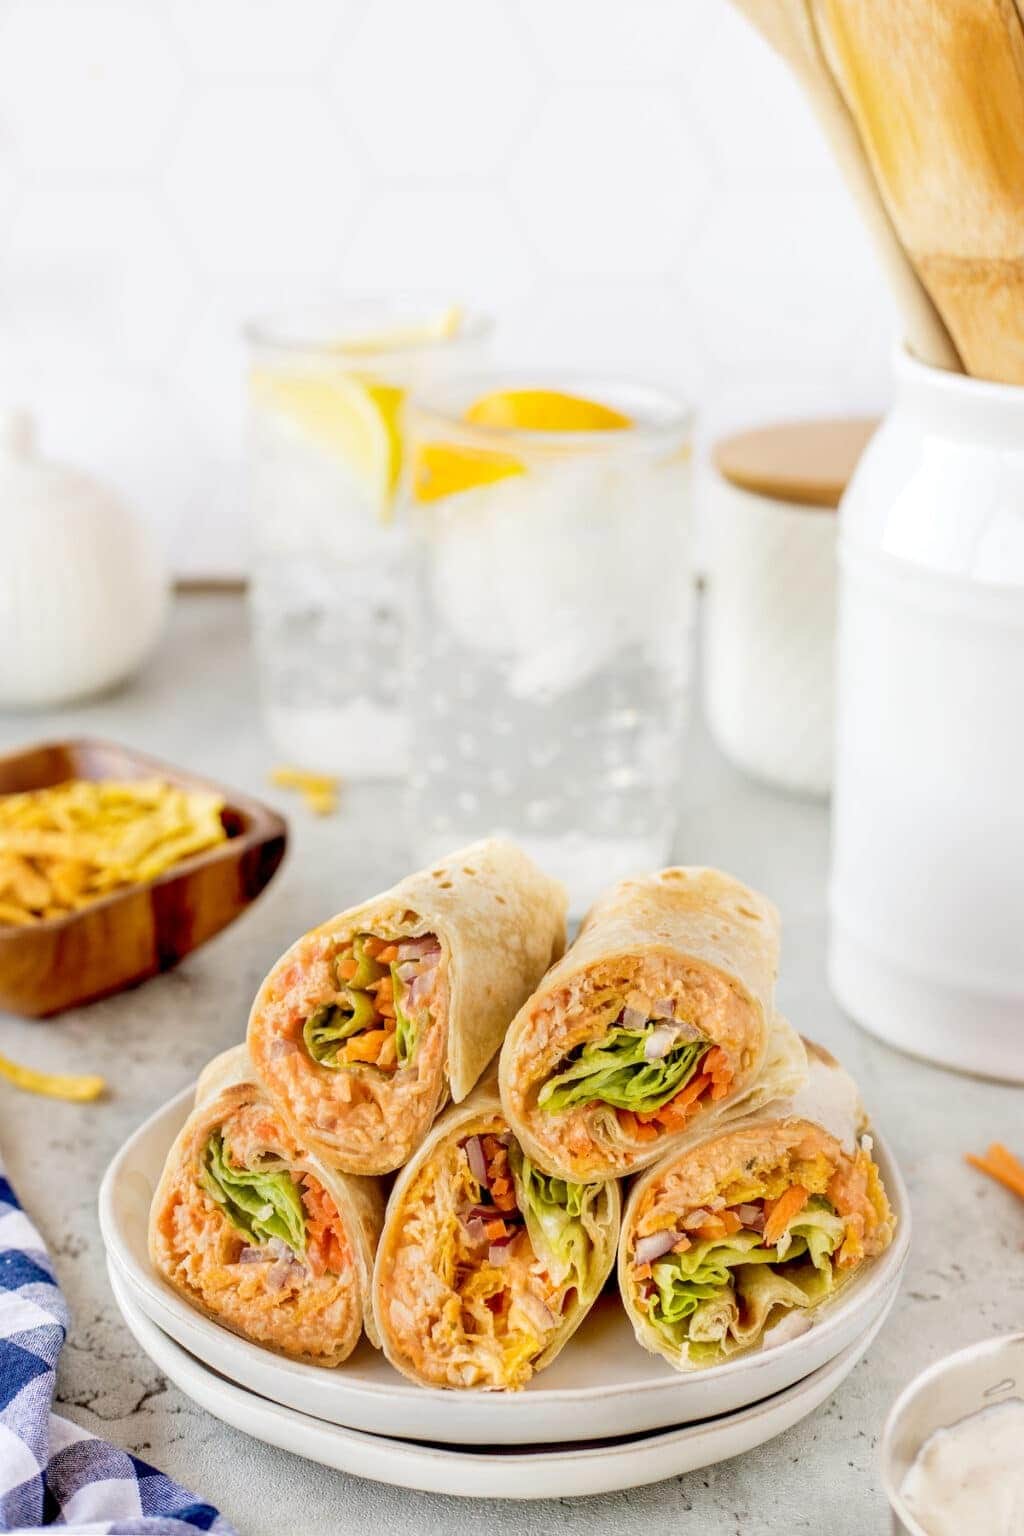 Homemade Buffalo Chicken Wraps with ranch dressing. carrots and lettuce